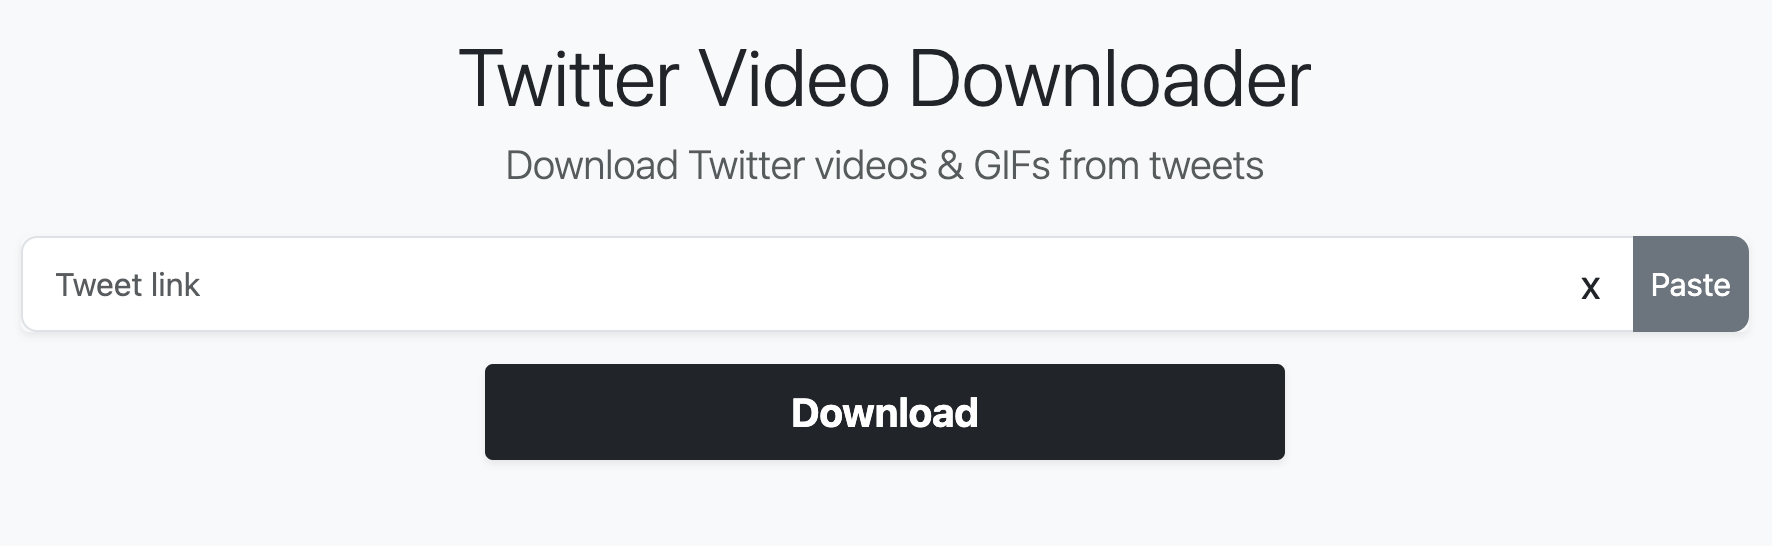 X Video Downloader Easy To Follow Guide AutomationLinks blog